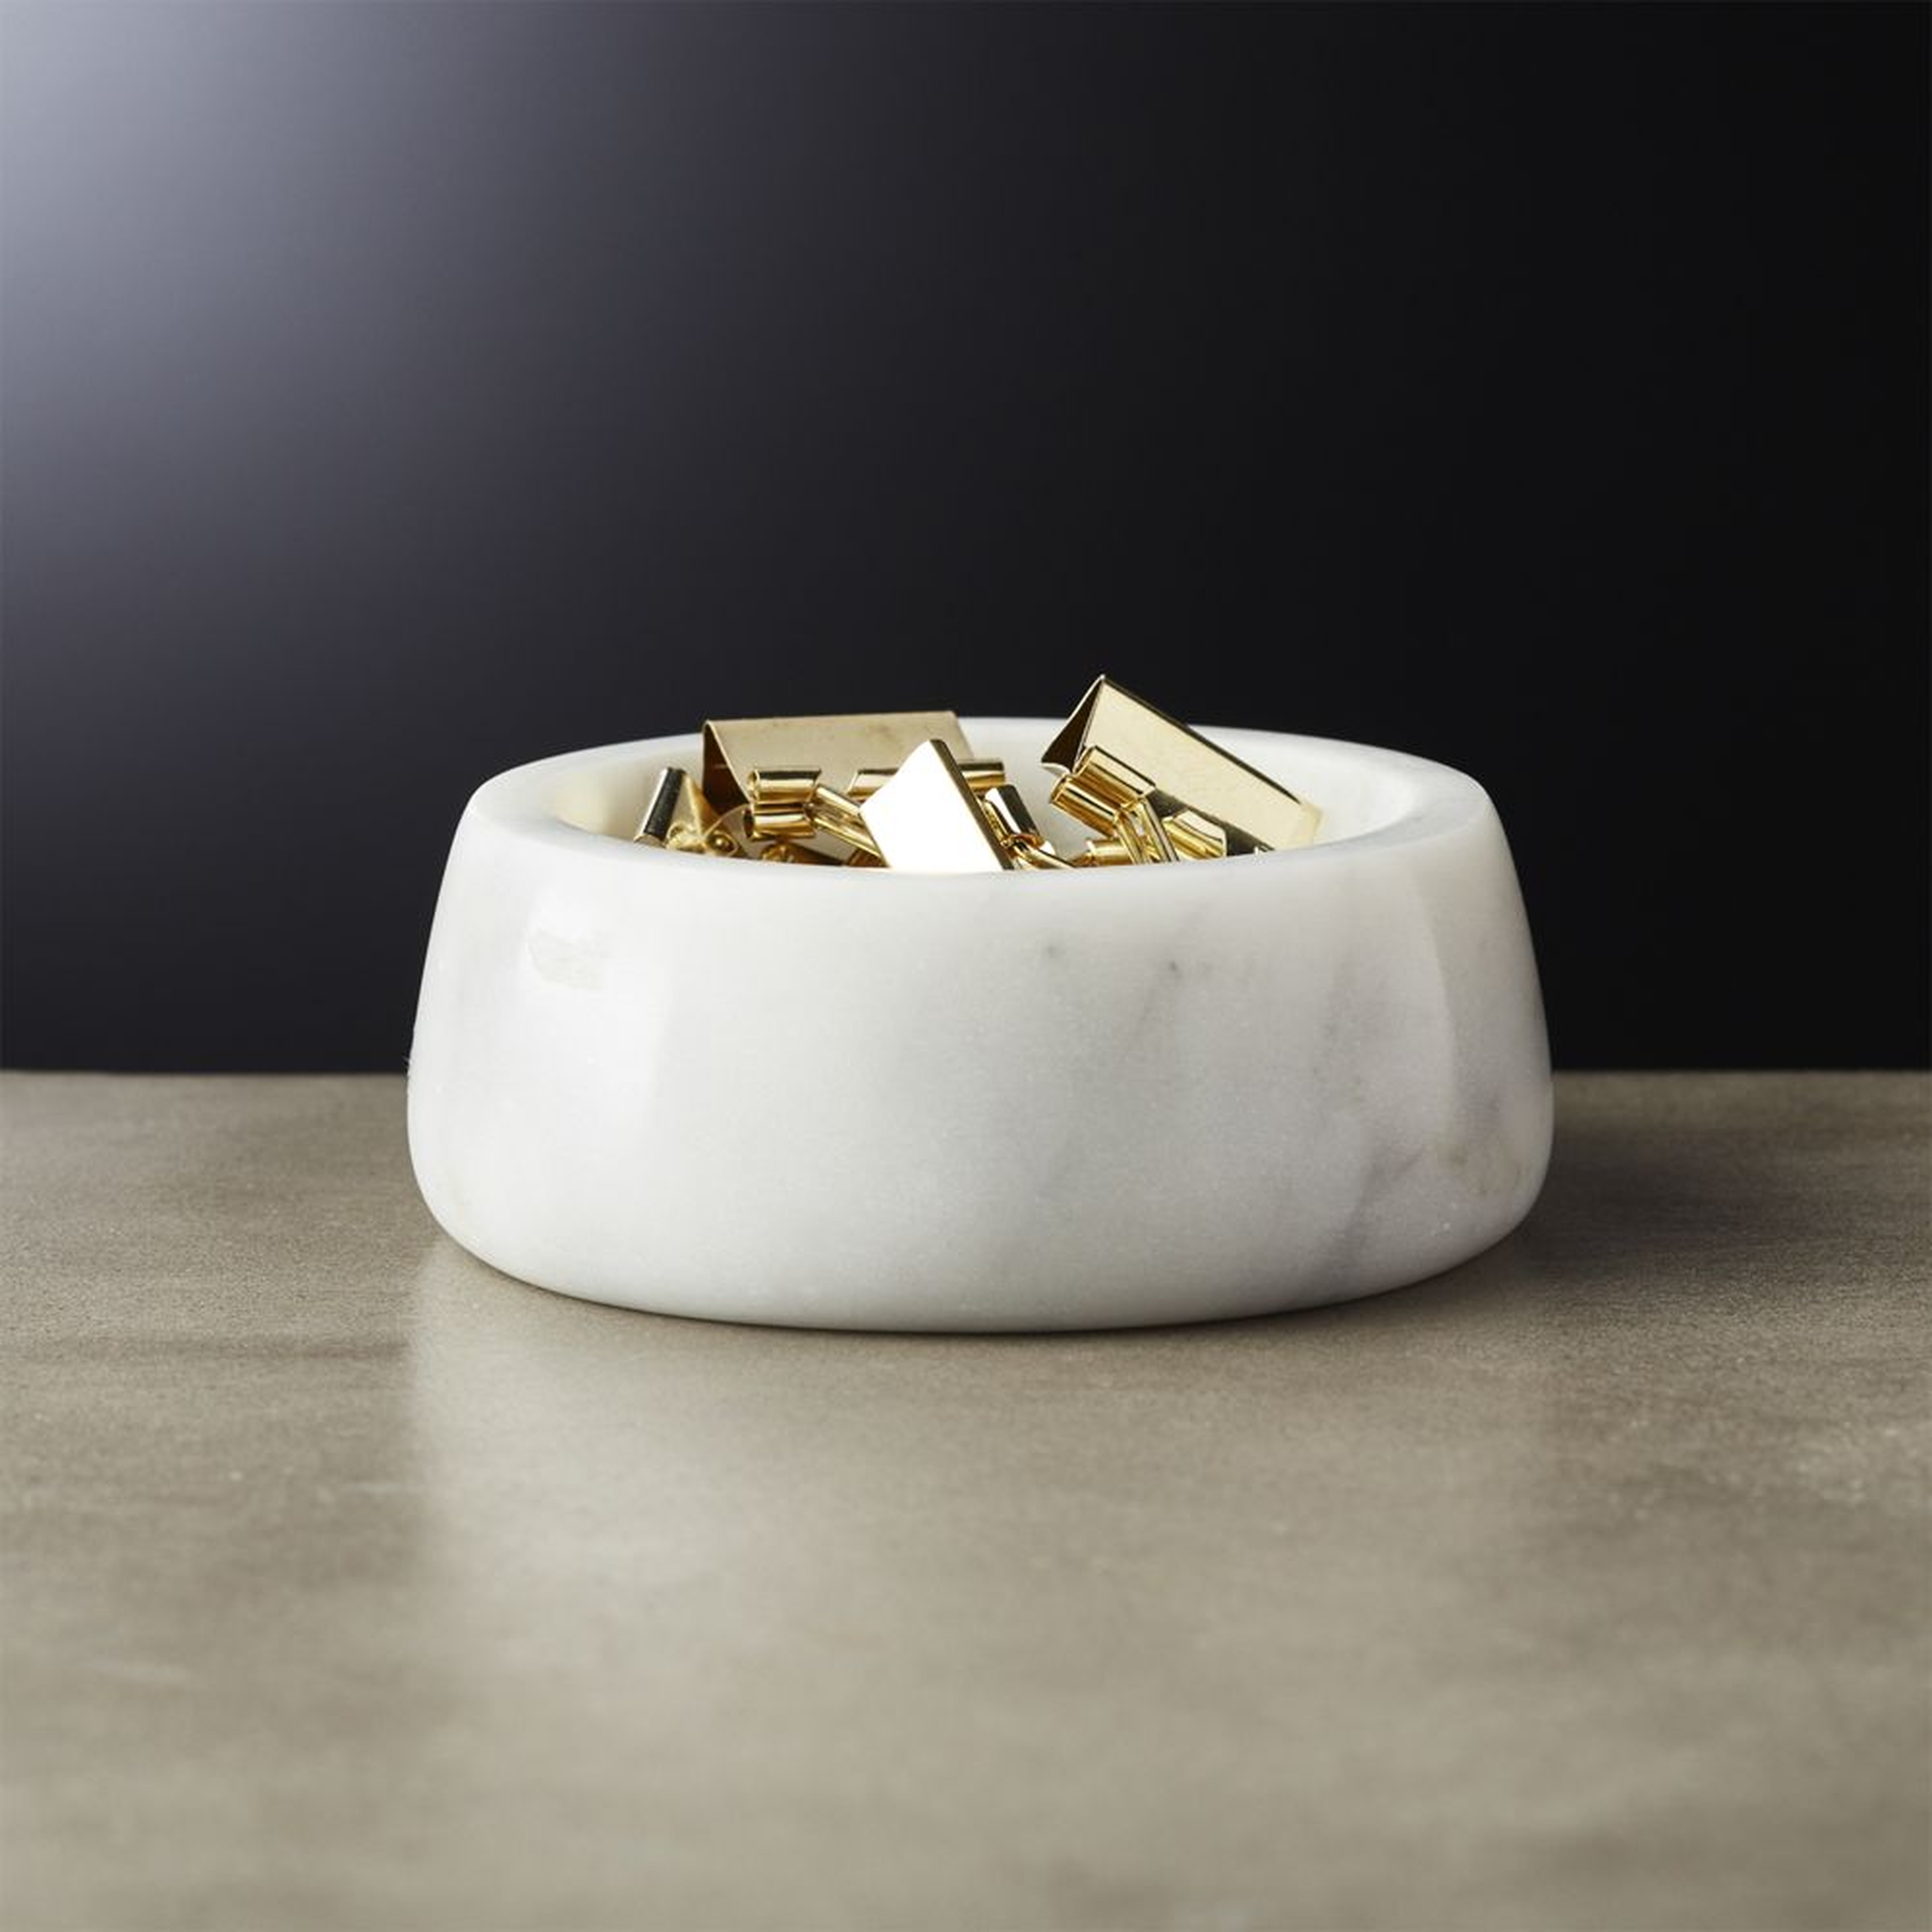 Marble Catchall - CB2